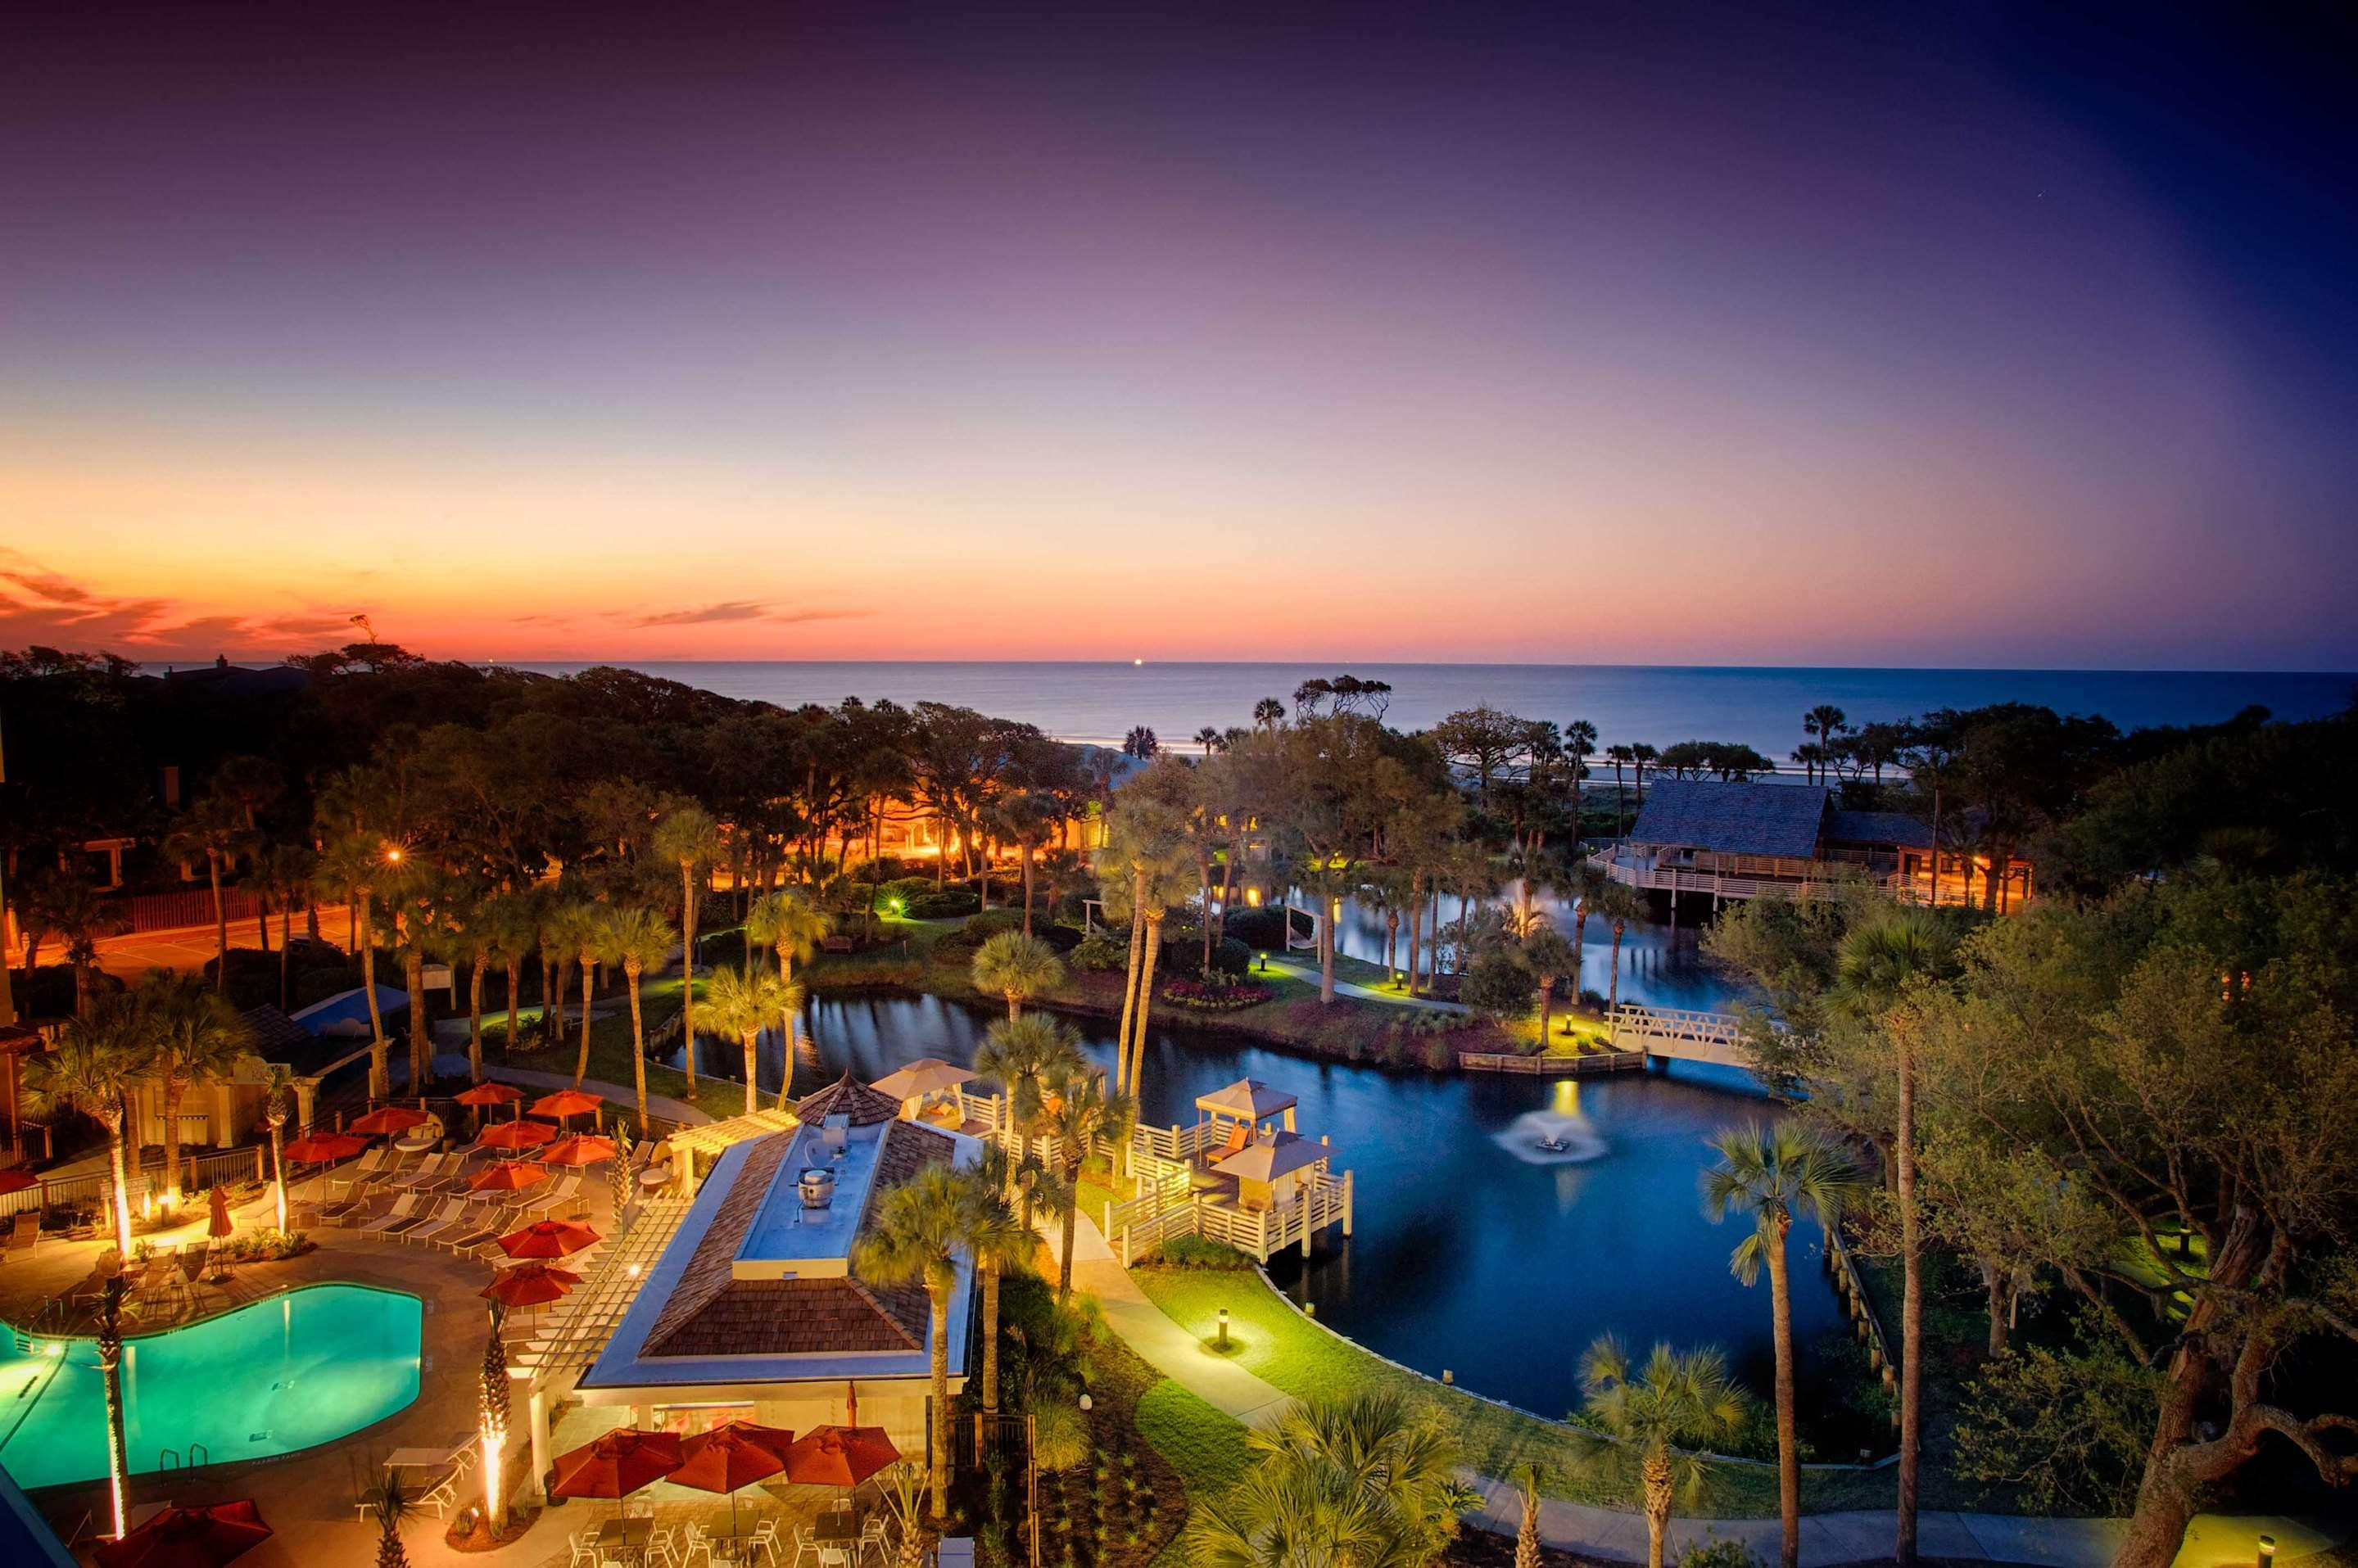 Sunset view of the Sonesta Resort Hilton Head with Atlantic Ocean in background